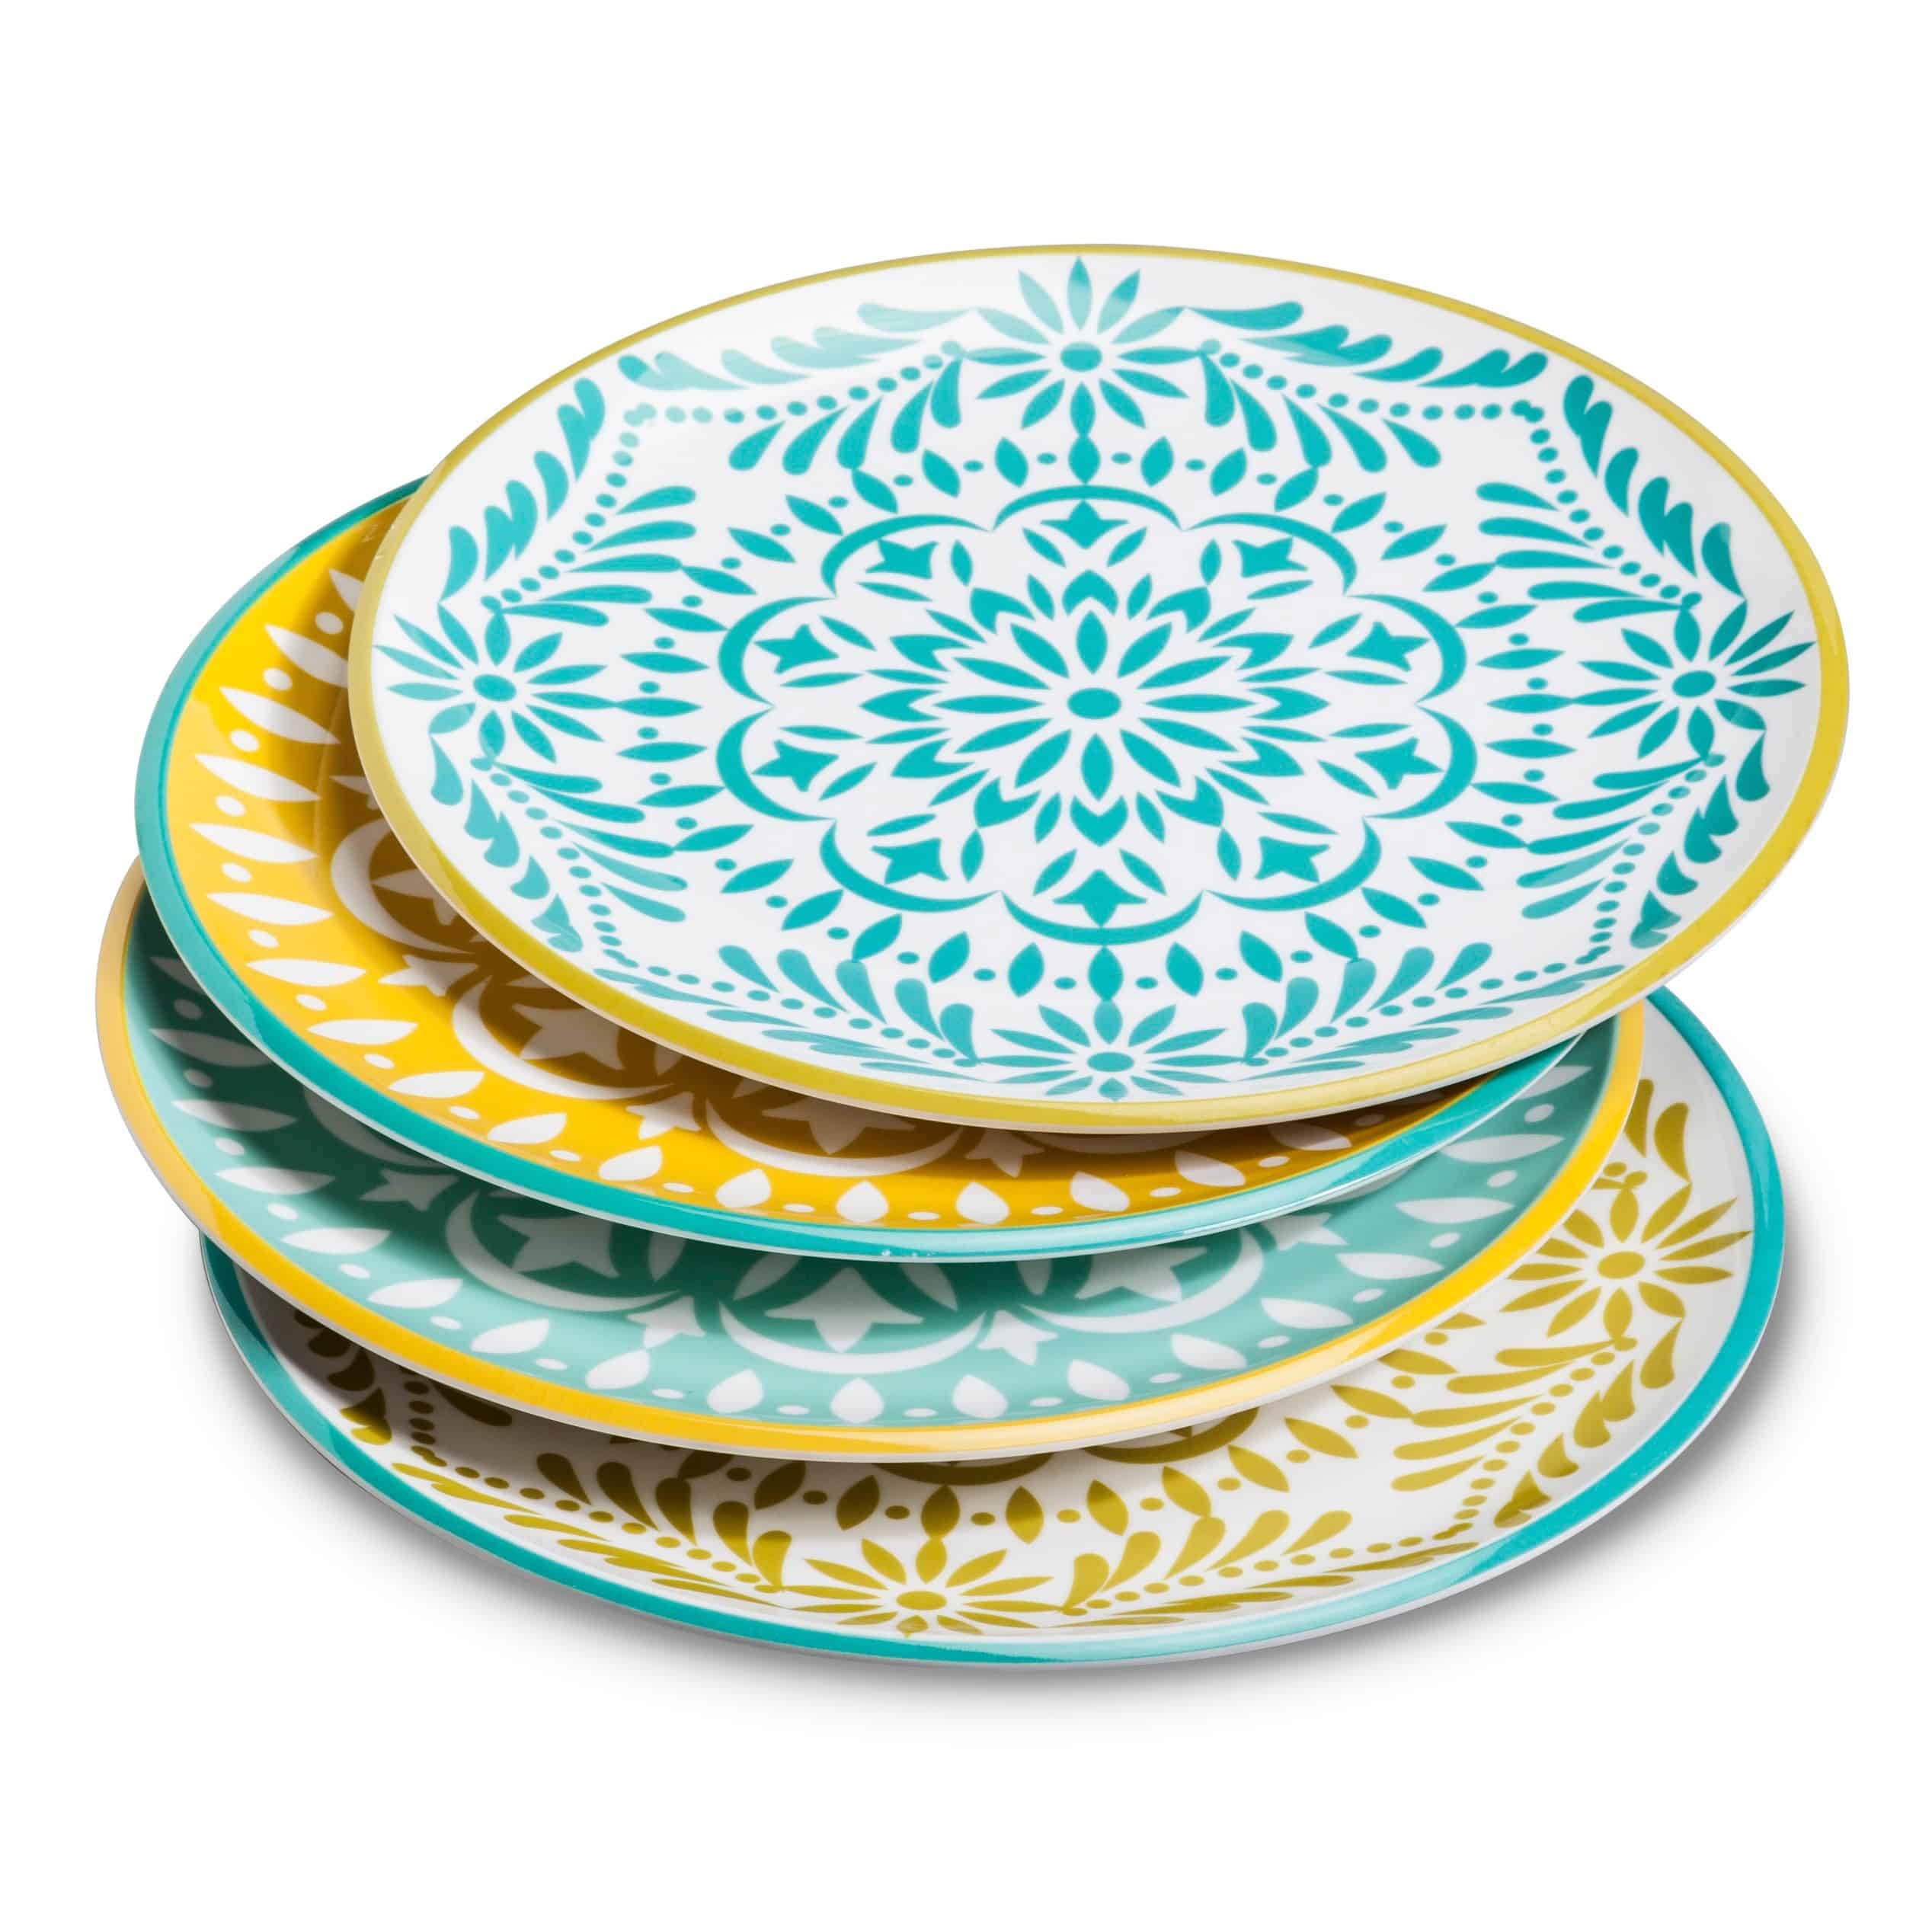 These Target plates are a perfect budget friendly option for summer dining! 